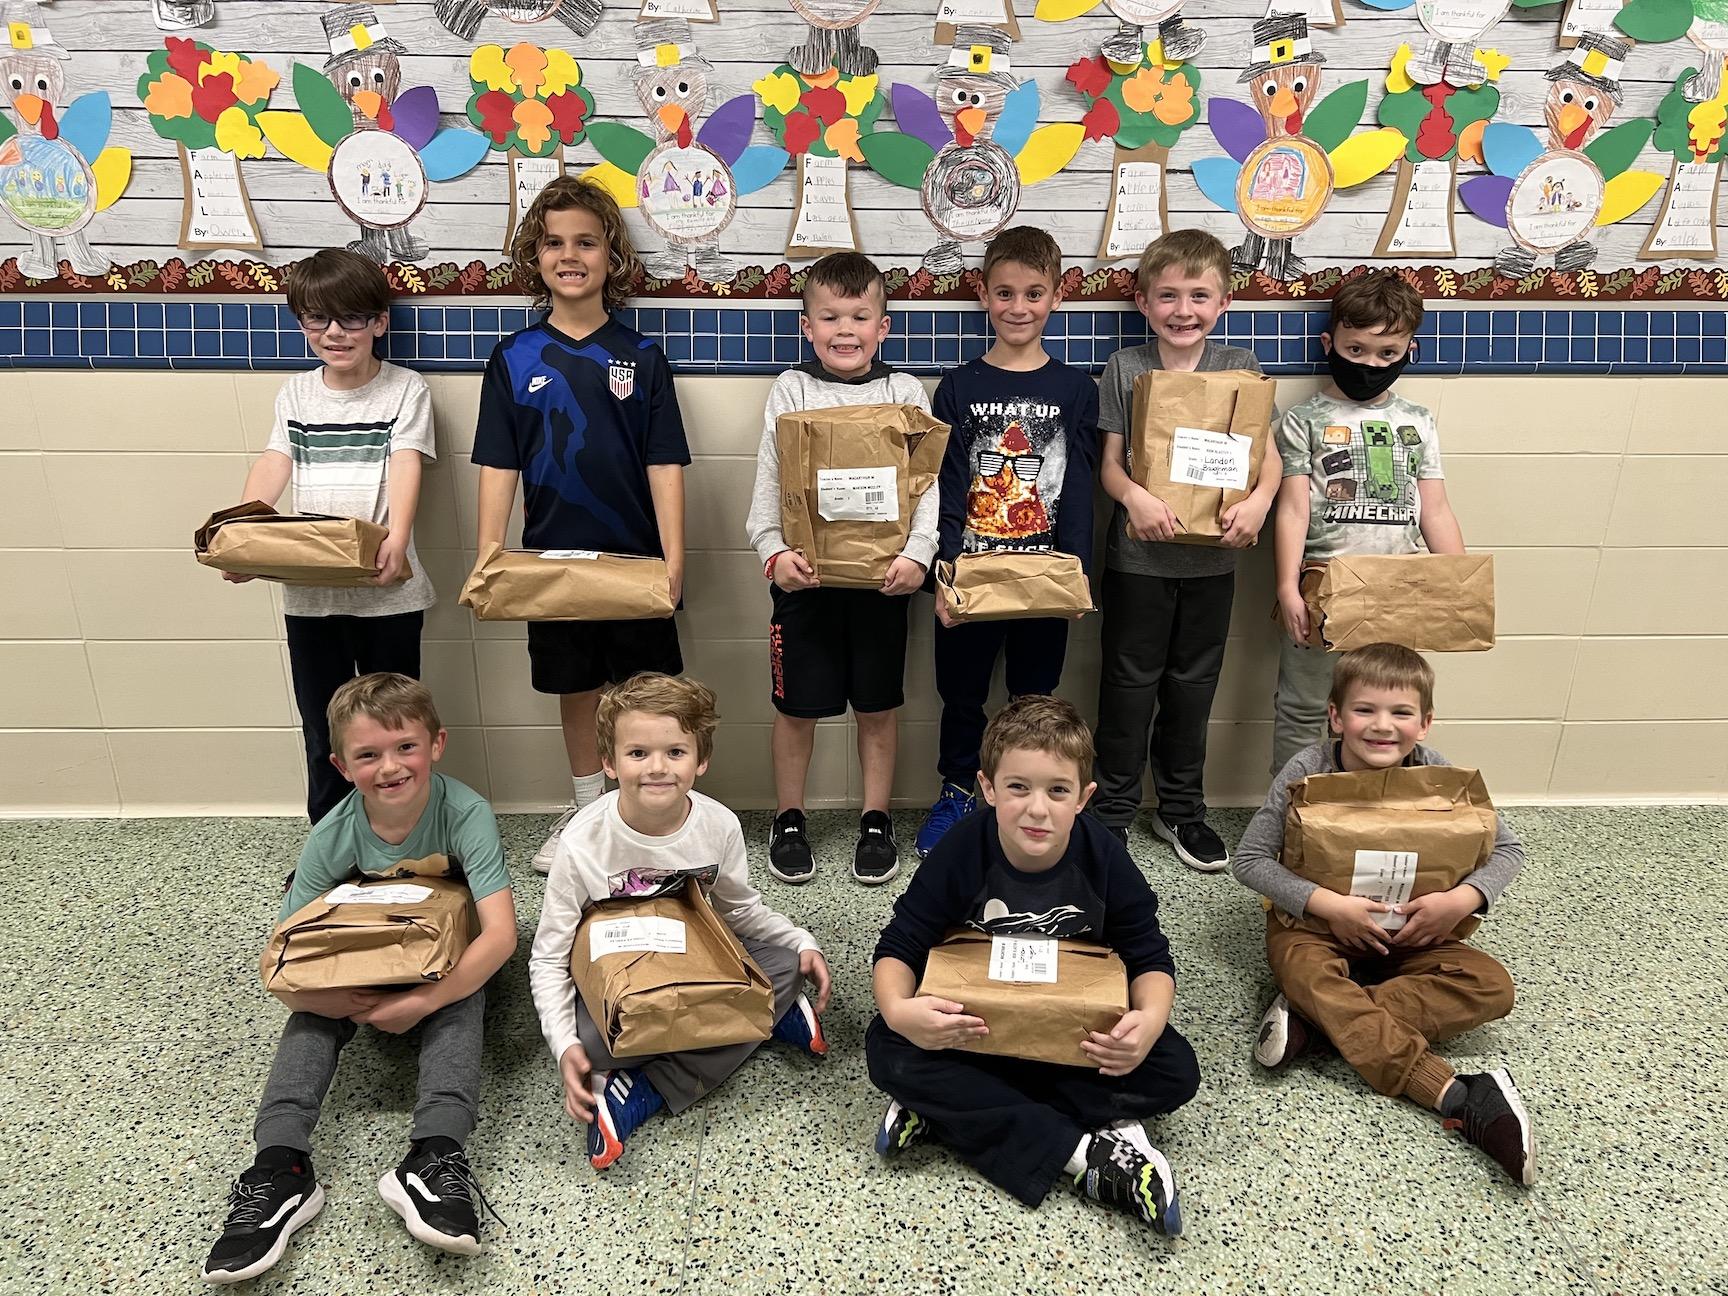 Mrs. Macarthur’s 2nd-graders can’t wait to read their new books